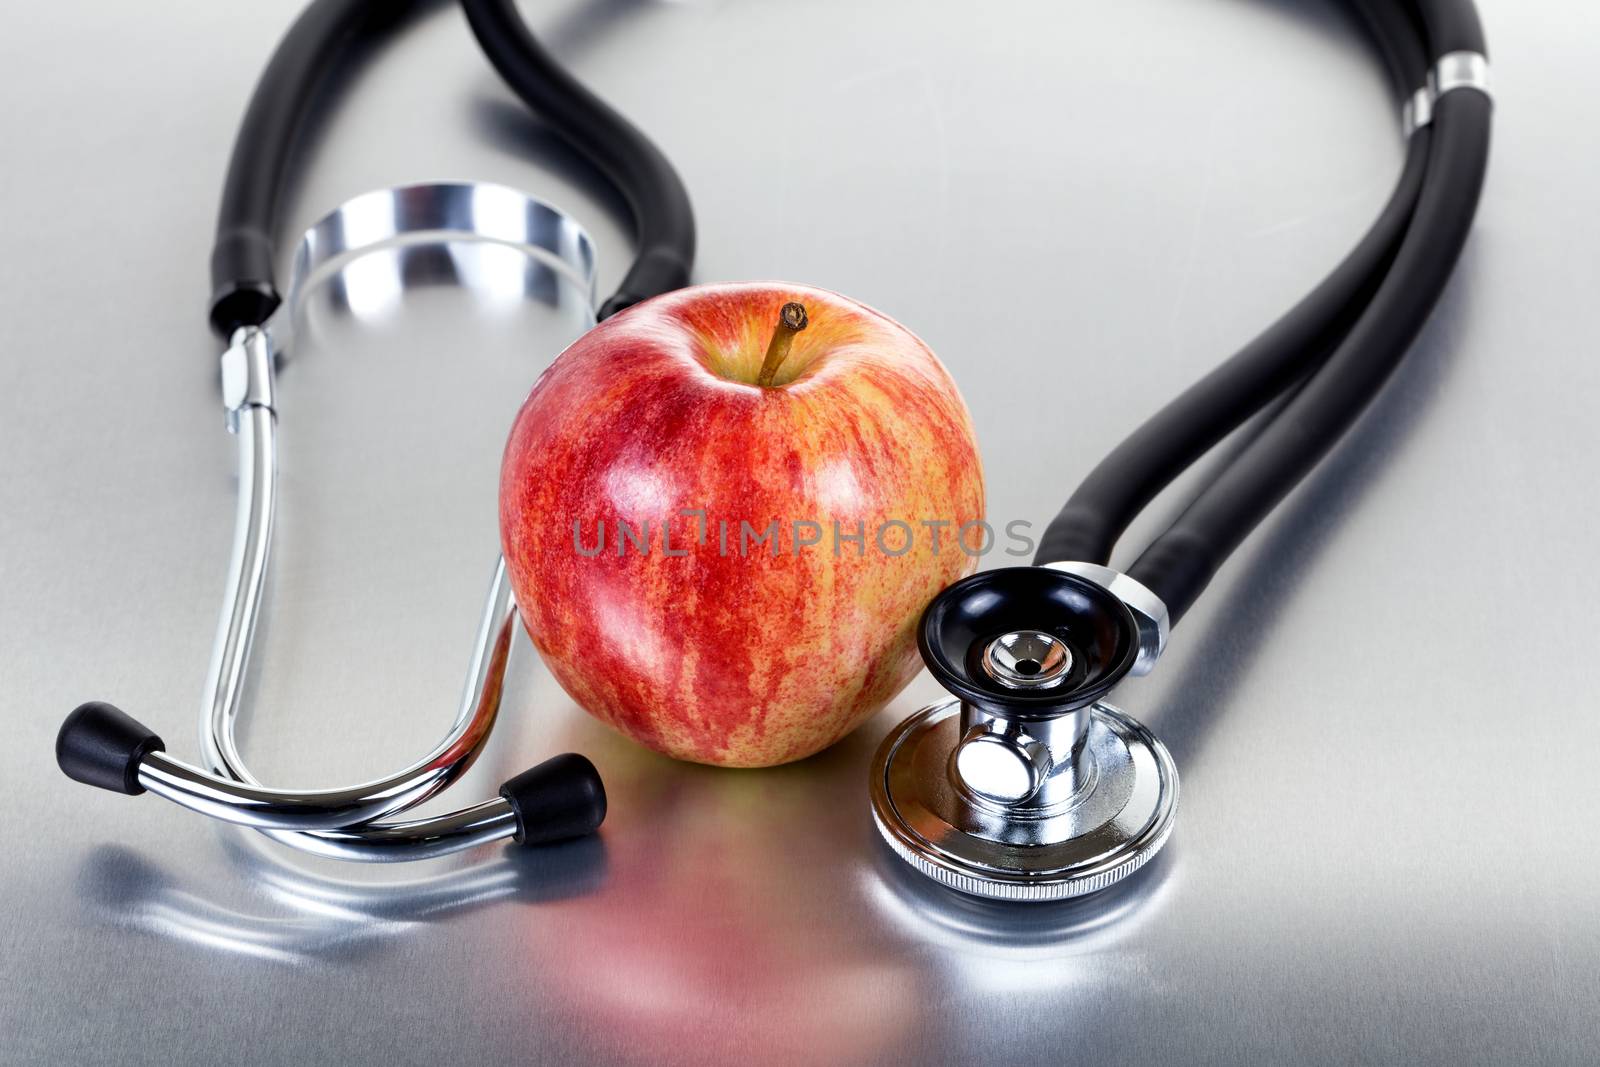 Fresh red apple and stethoscope on stainless steel  by tab1962